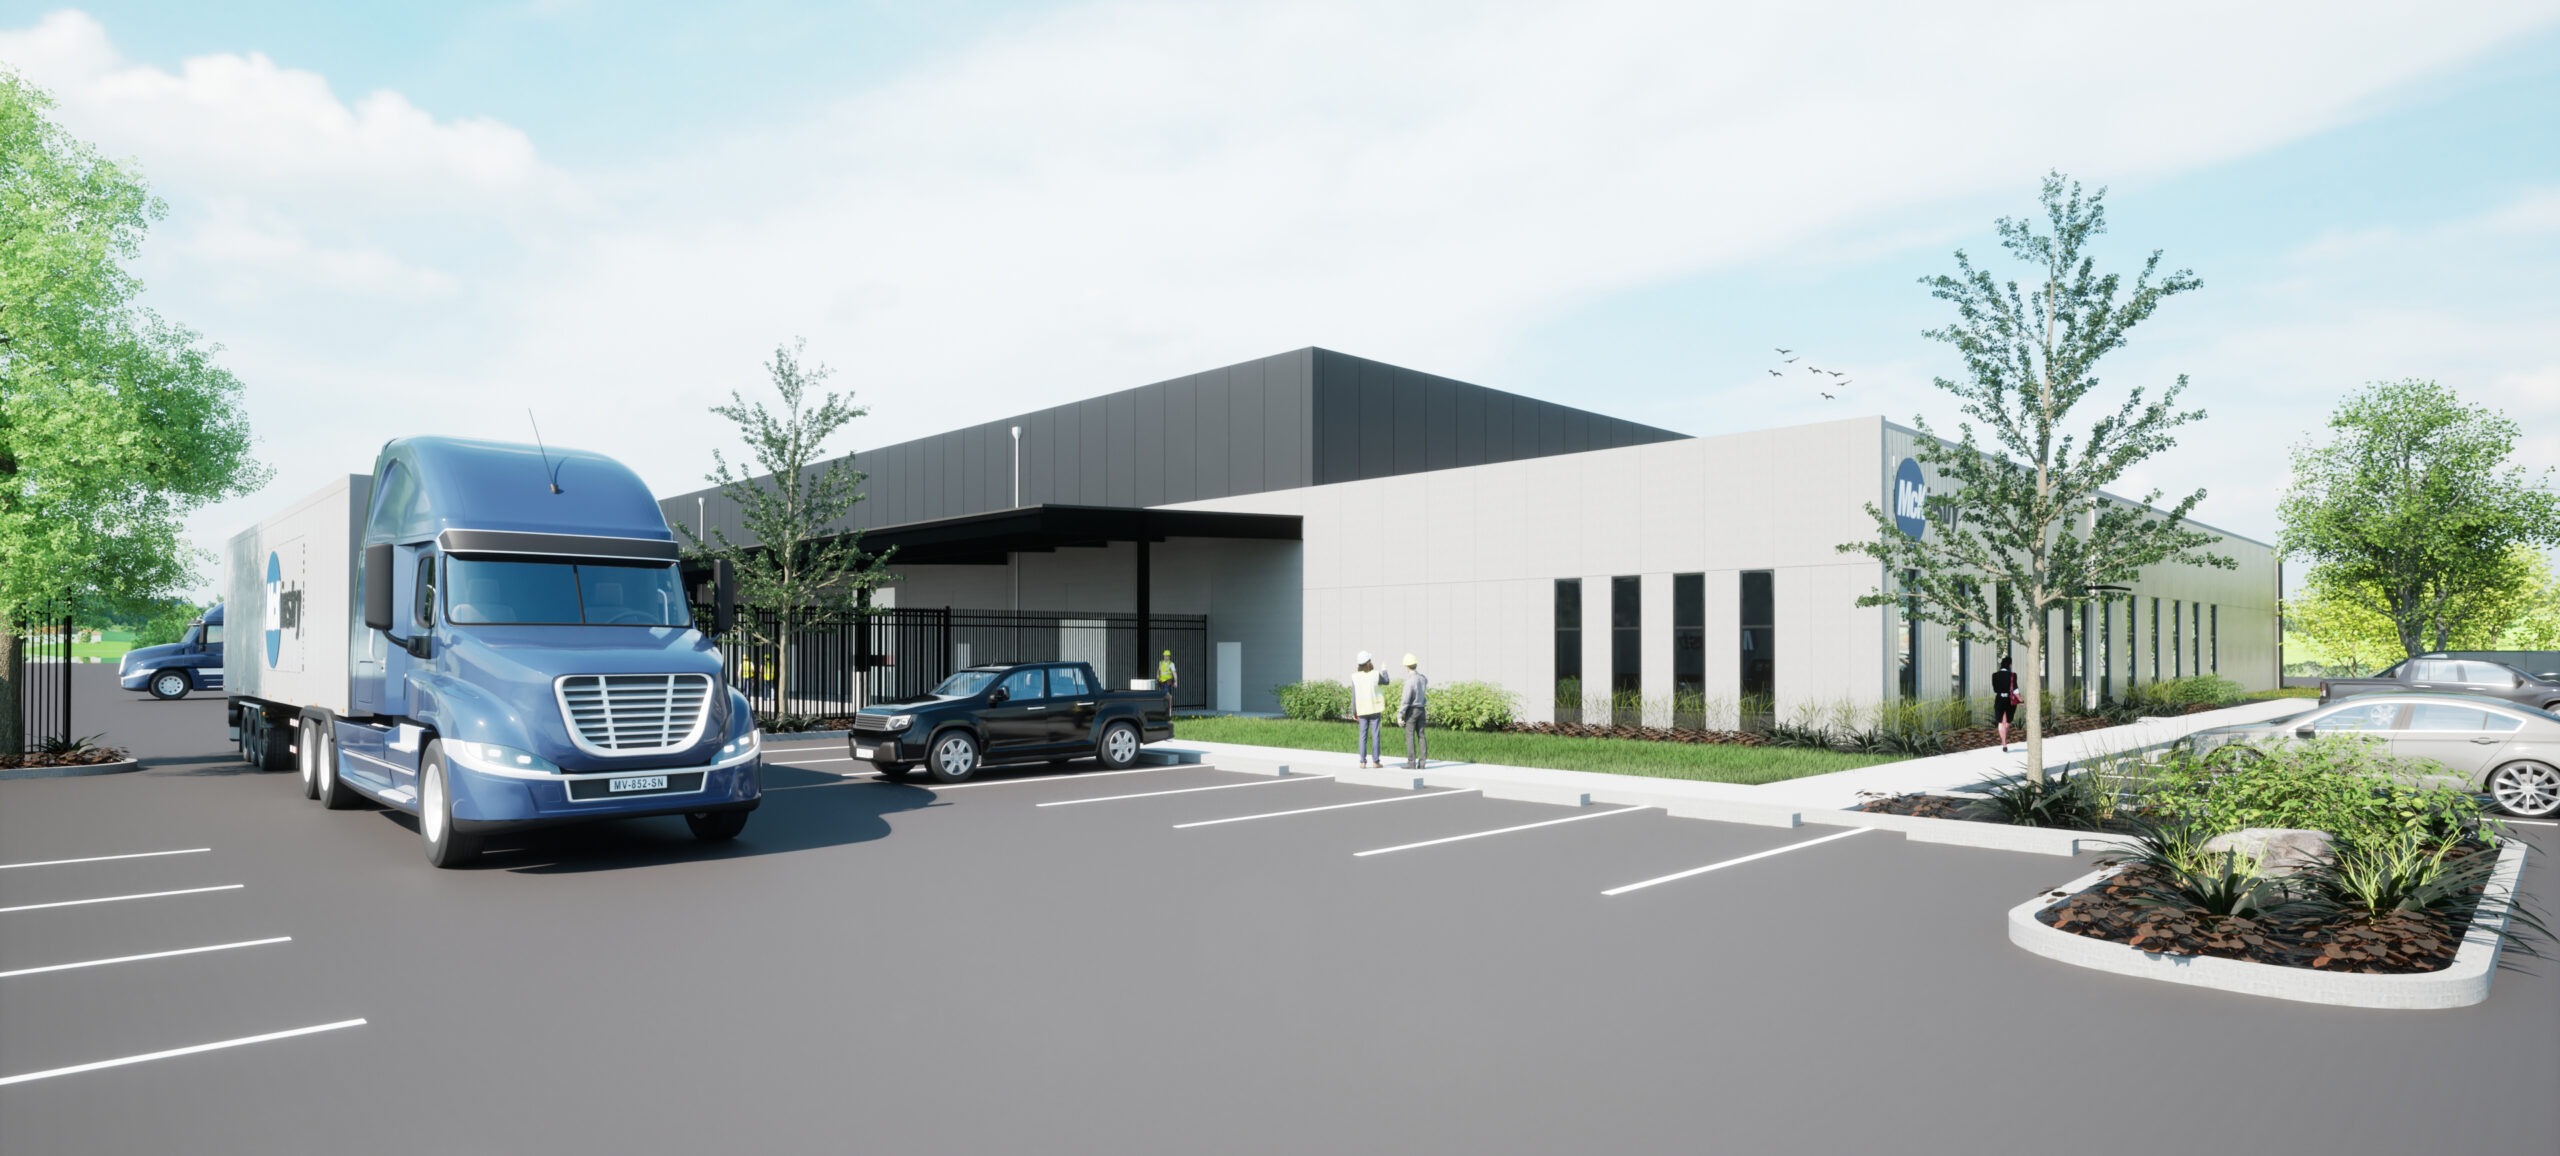 A 3d rendering of a warehouse building for a company named McKinstry.